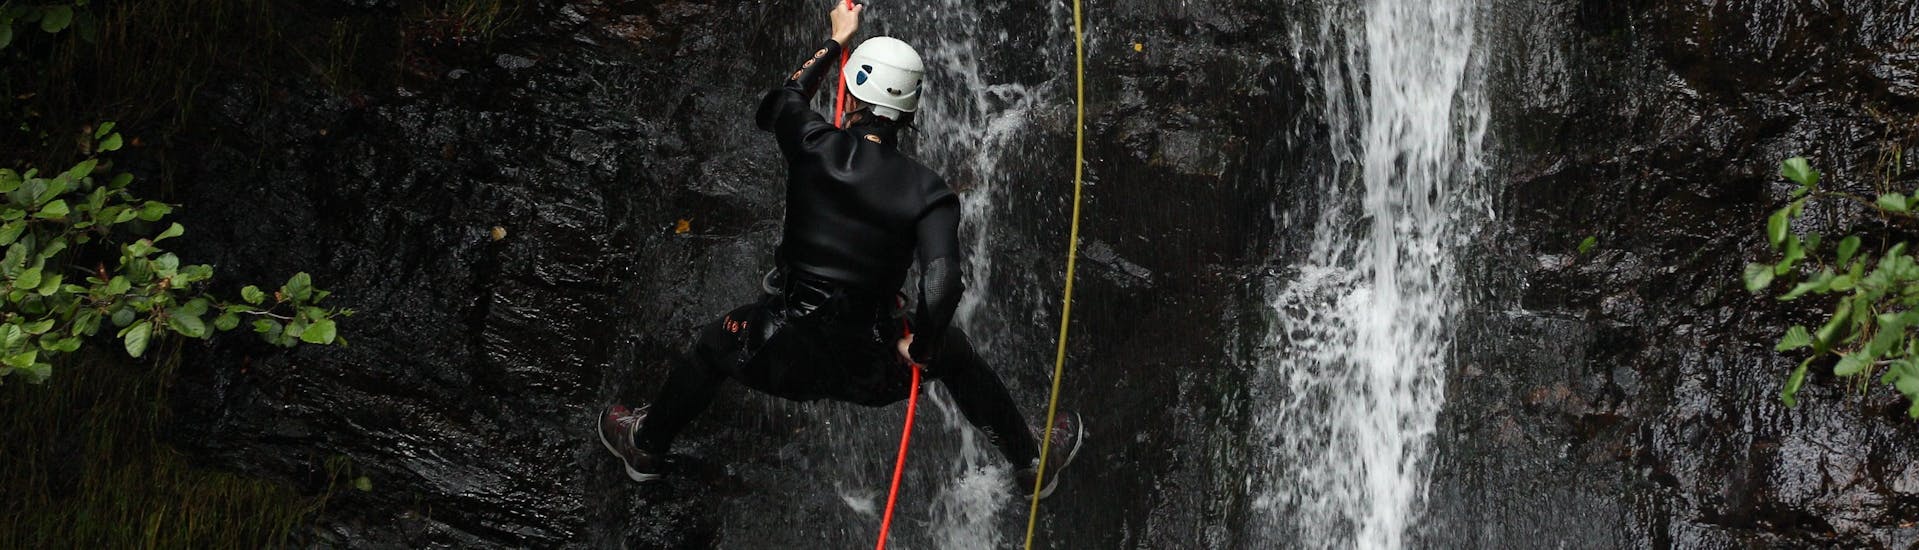 An abseiler is making his way down a cliff during a canyoning tour organised by ROCROI.